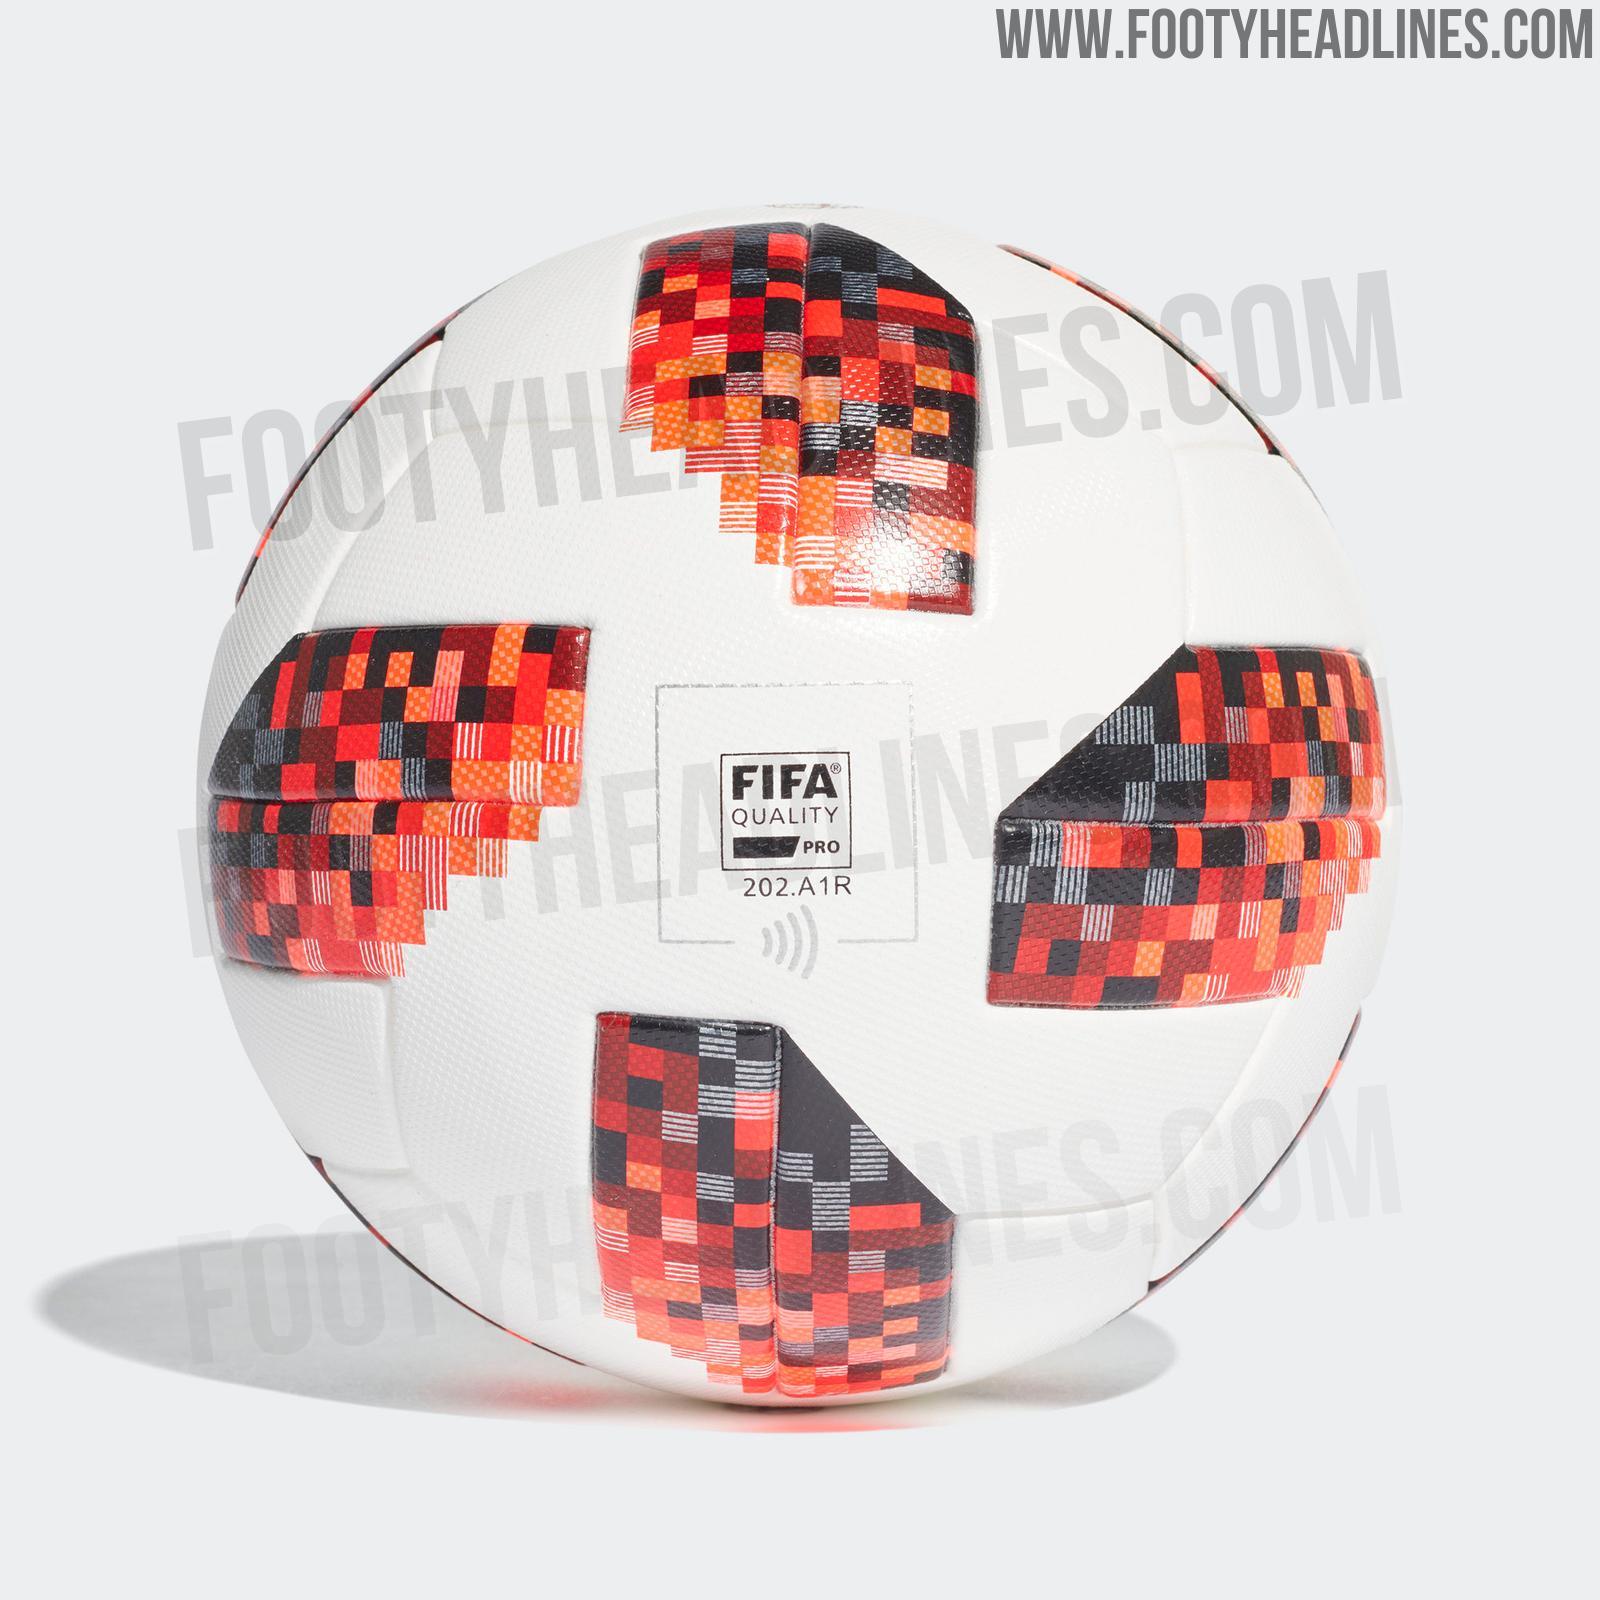 Comida Monumental Preconcepción Adidas Telstar 18 'Mechta' 2018 World Cup Knock-Out Stage Ball Revealed -  Footy Headlines